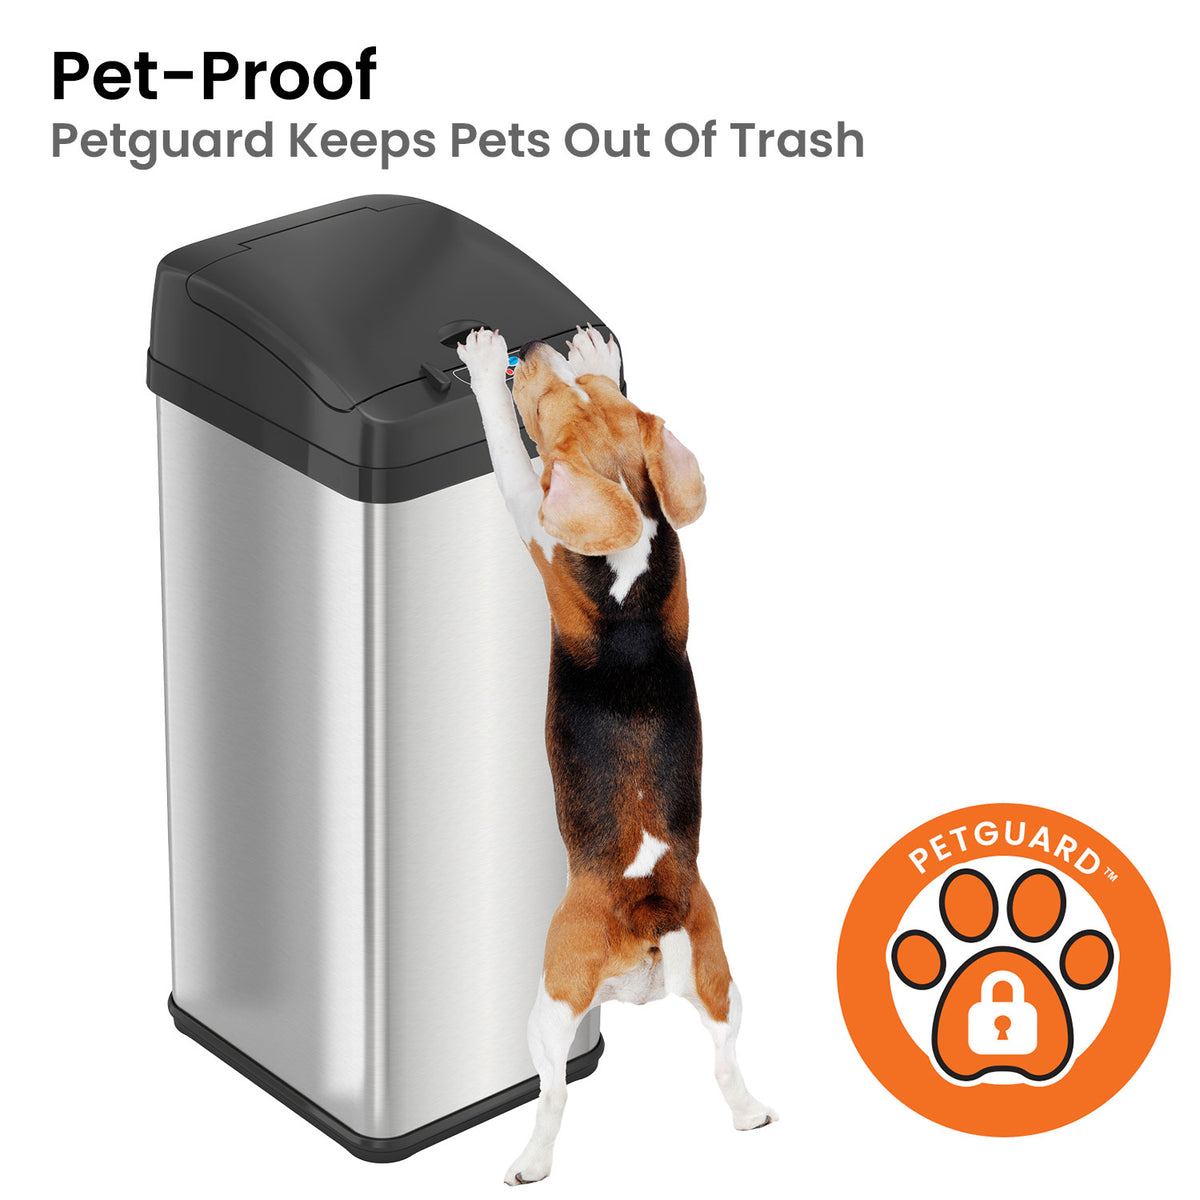 Dog-Proof Trash Cans Archives